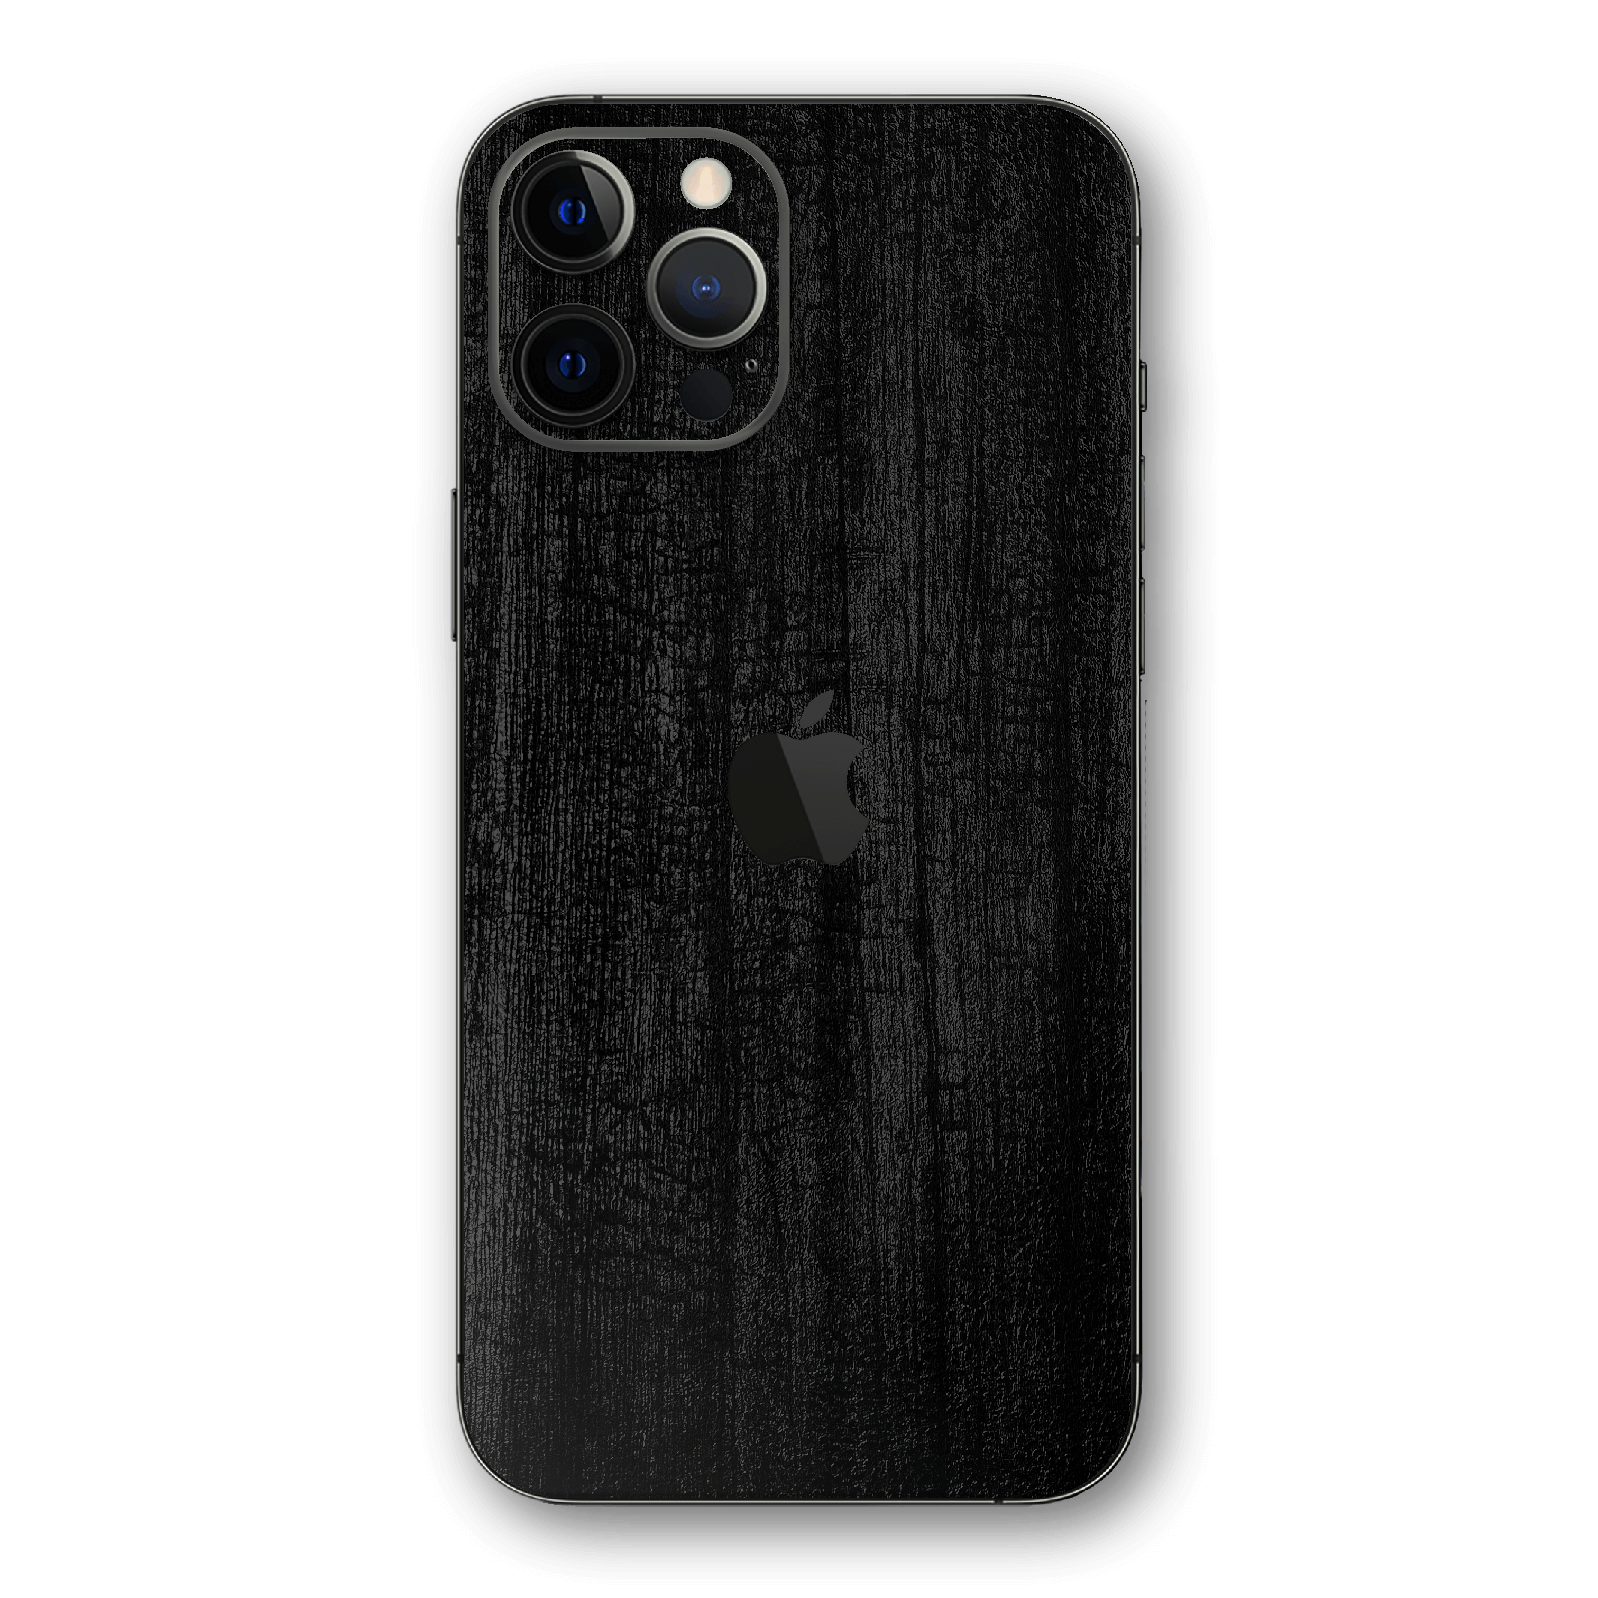 iPhone 12 Pro MAX LUXURIA Black CHARCOAL Skin - Premium Protective Skin Wrap Sticker Decal Cover by QSKINZ | Qskinz.com